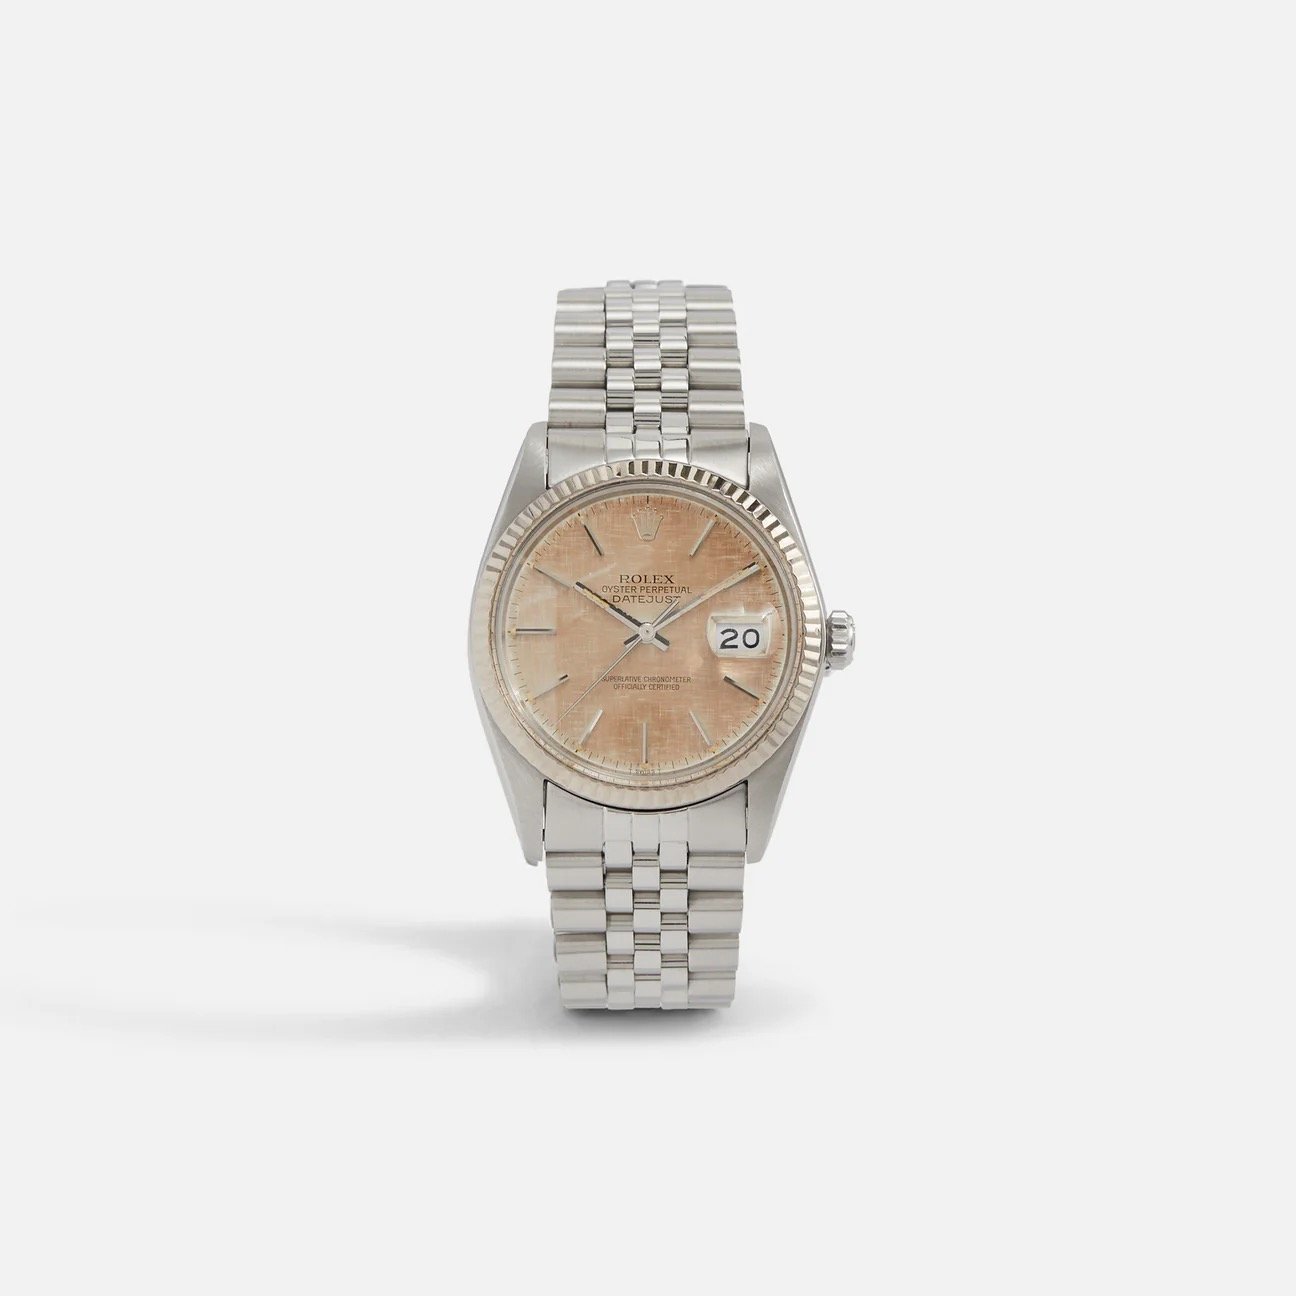 Rolex Datejust Reference 16014 Linen Patina Dial Unpolished